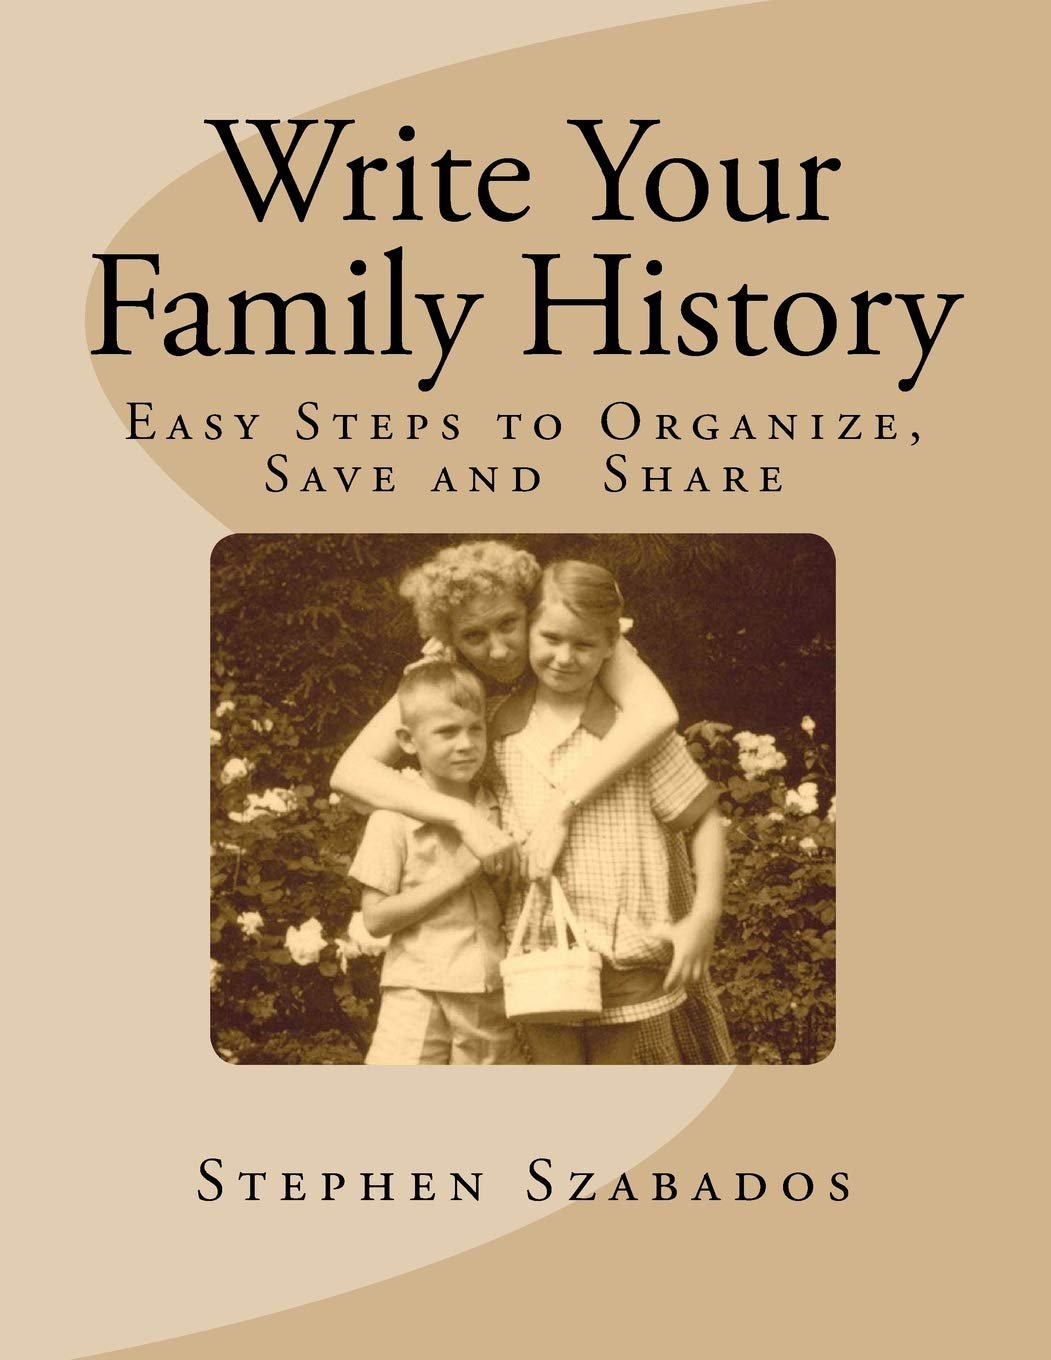  The best books on writing family history include  Write Your Family History: Easy Steps to Organize, Save and Share  by Stephen Szabados 